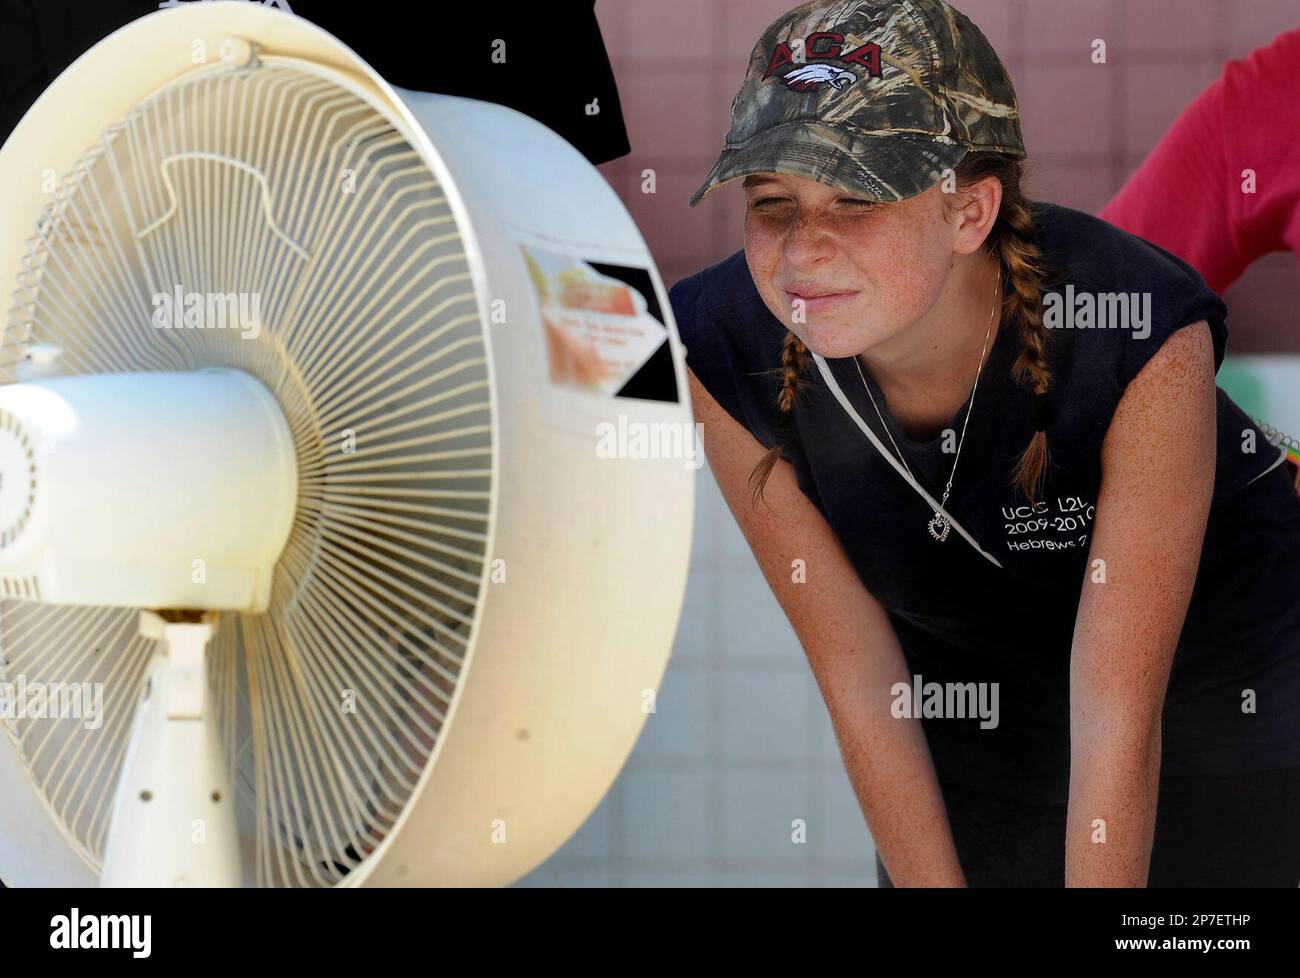 In this July 26, 2010 photo, Alabama Christian Academy marching band member  Kristina Clifton cools off in front of a misting fan during a break from  practice at the schools campus in